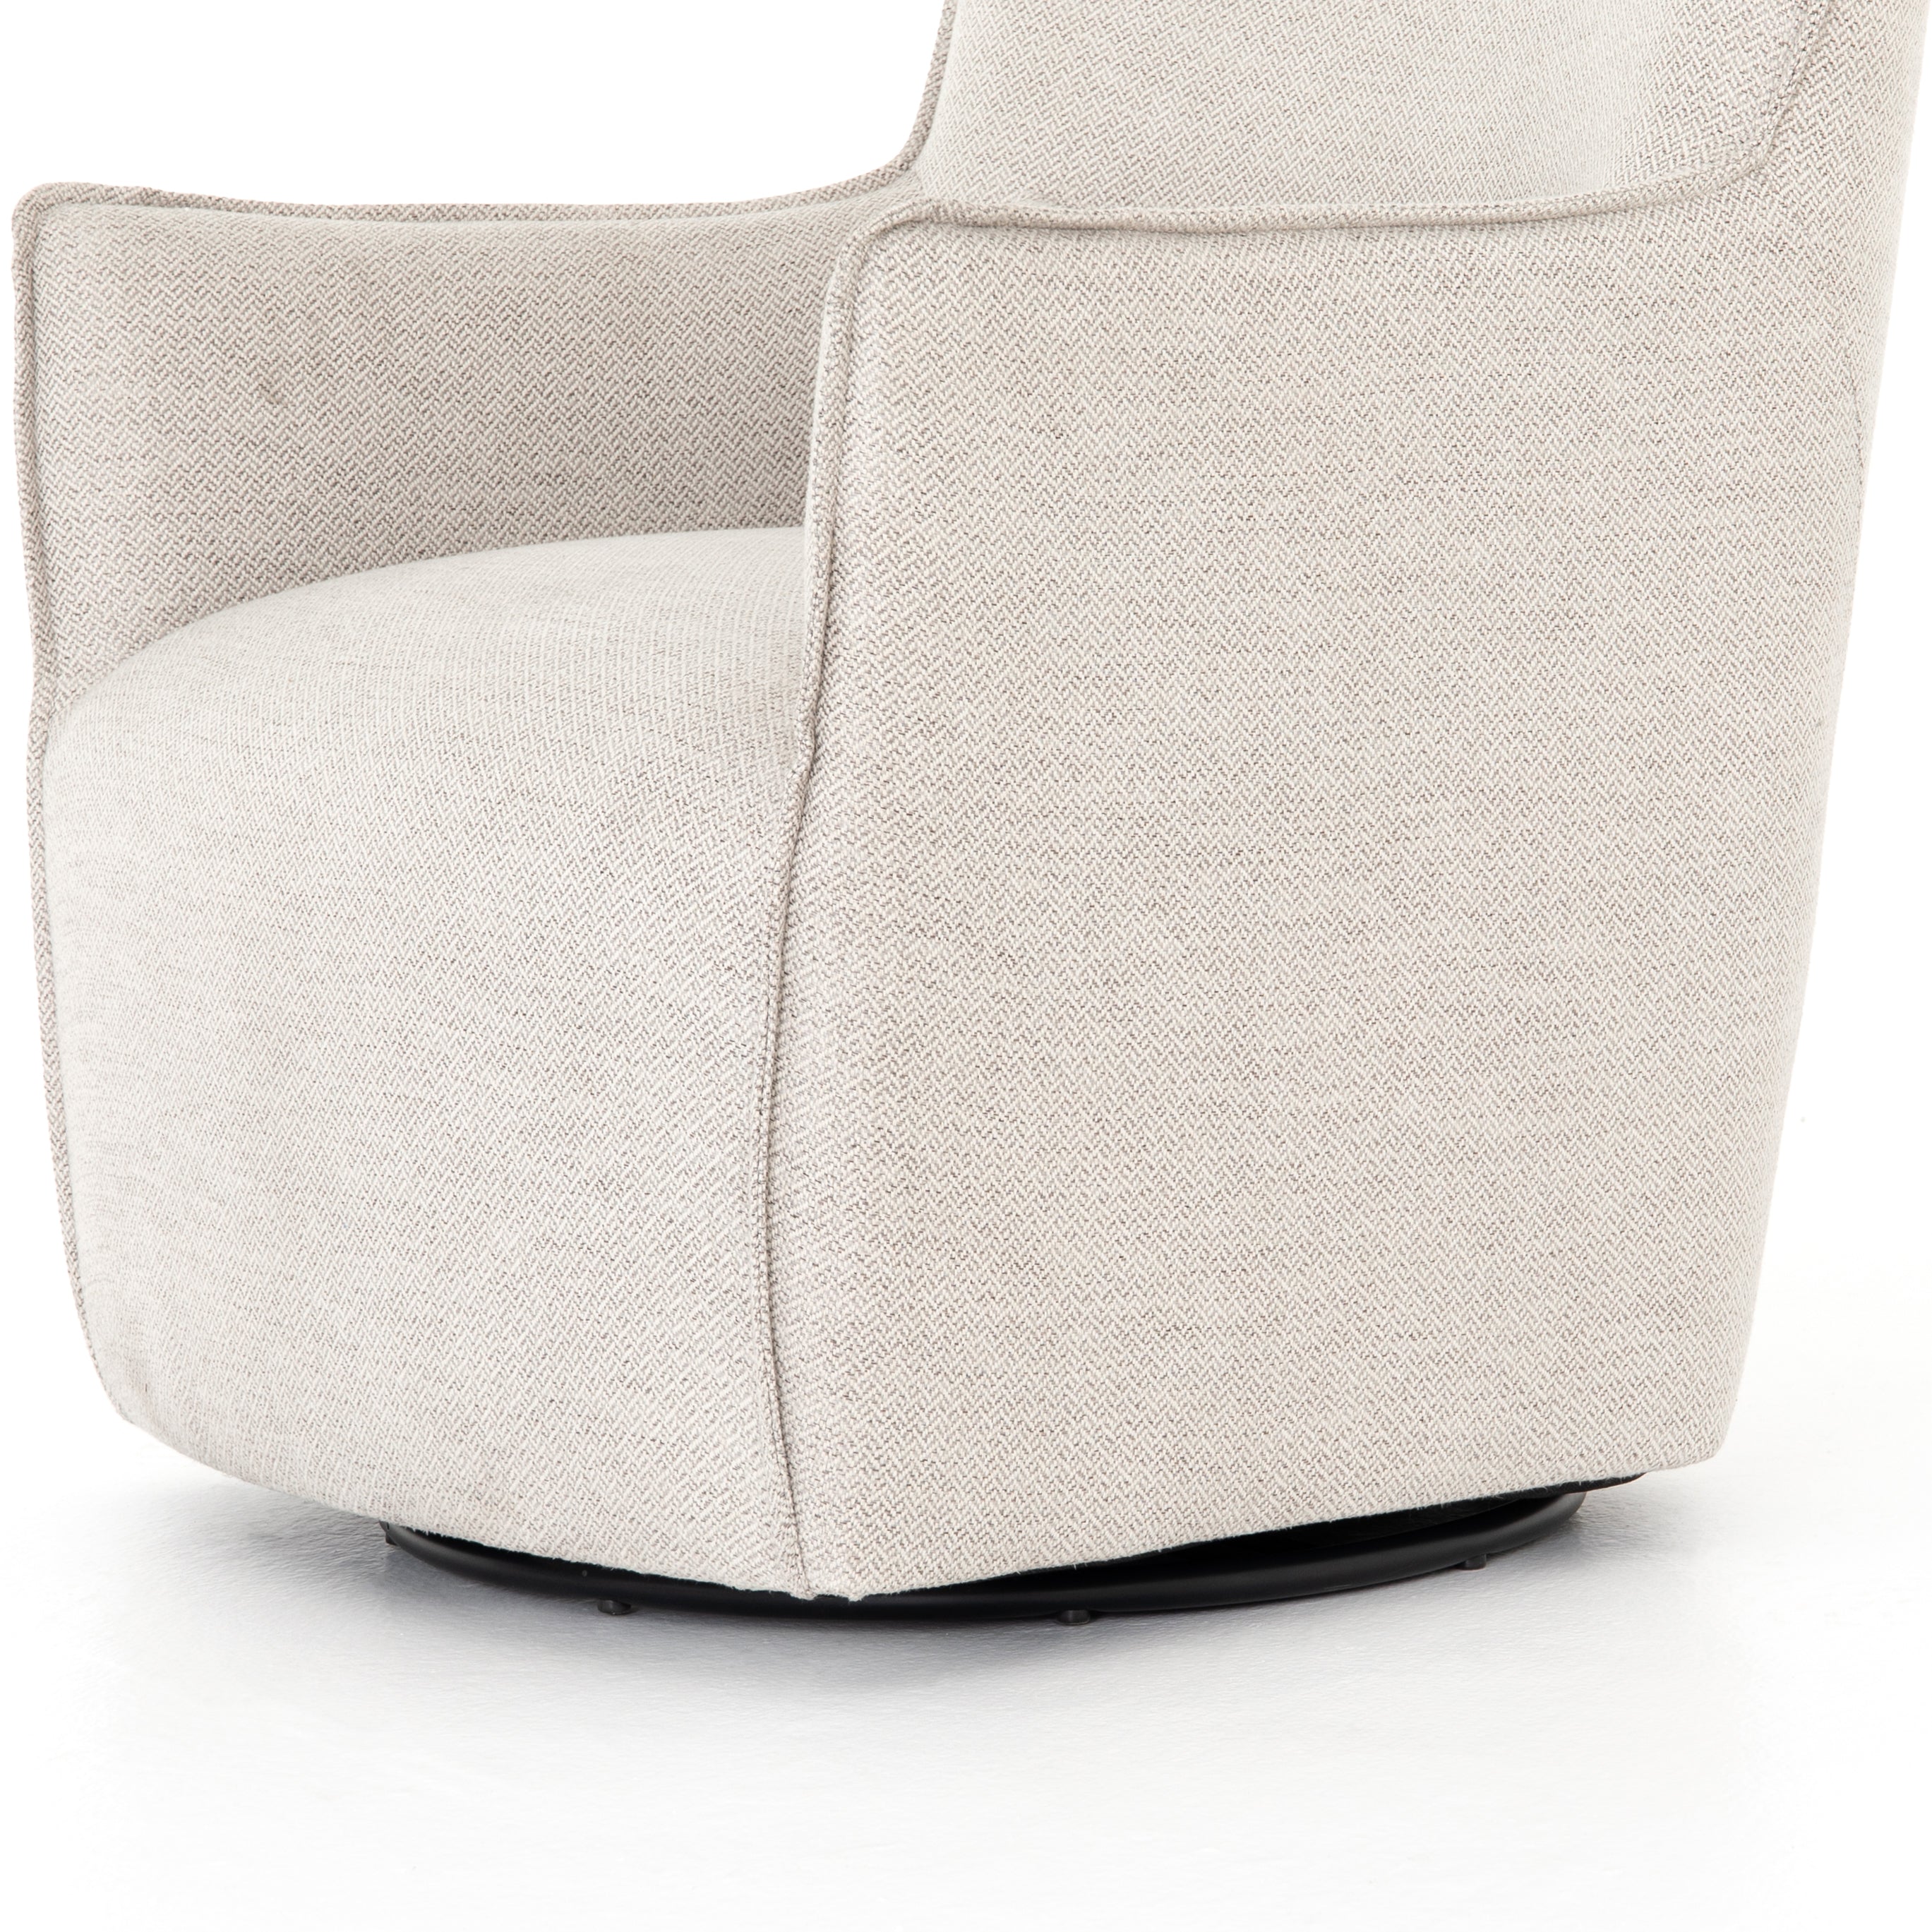 Expert tailoring on this Kimble Swivel - Noble Platinum creates a clean, sophisticated look, rich with come-hither comfort.  A tight sit and barrel shape is softened via flange seam detailing and swivel feature and finished off with a petite lumbar cushion, for the perfect mix of shape and function for any living room or baby room.   Overall Dimensions: 29.50"w x 31.50"d x 34.00"h